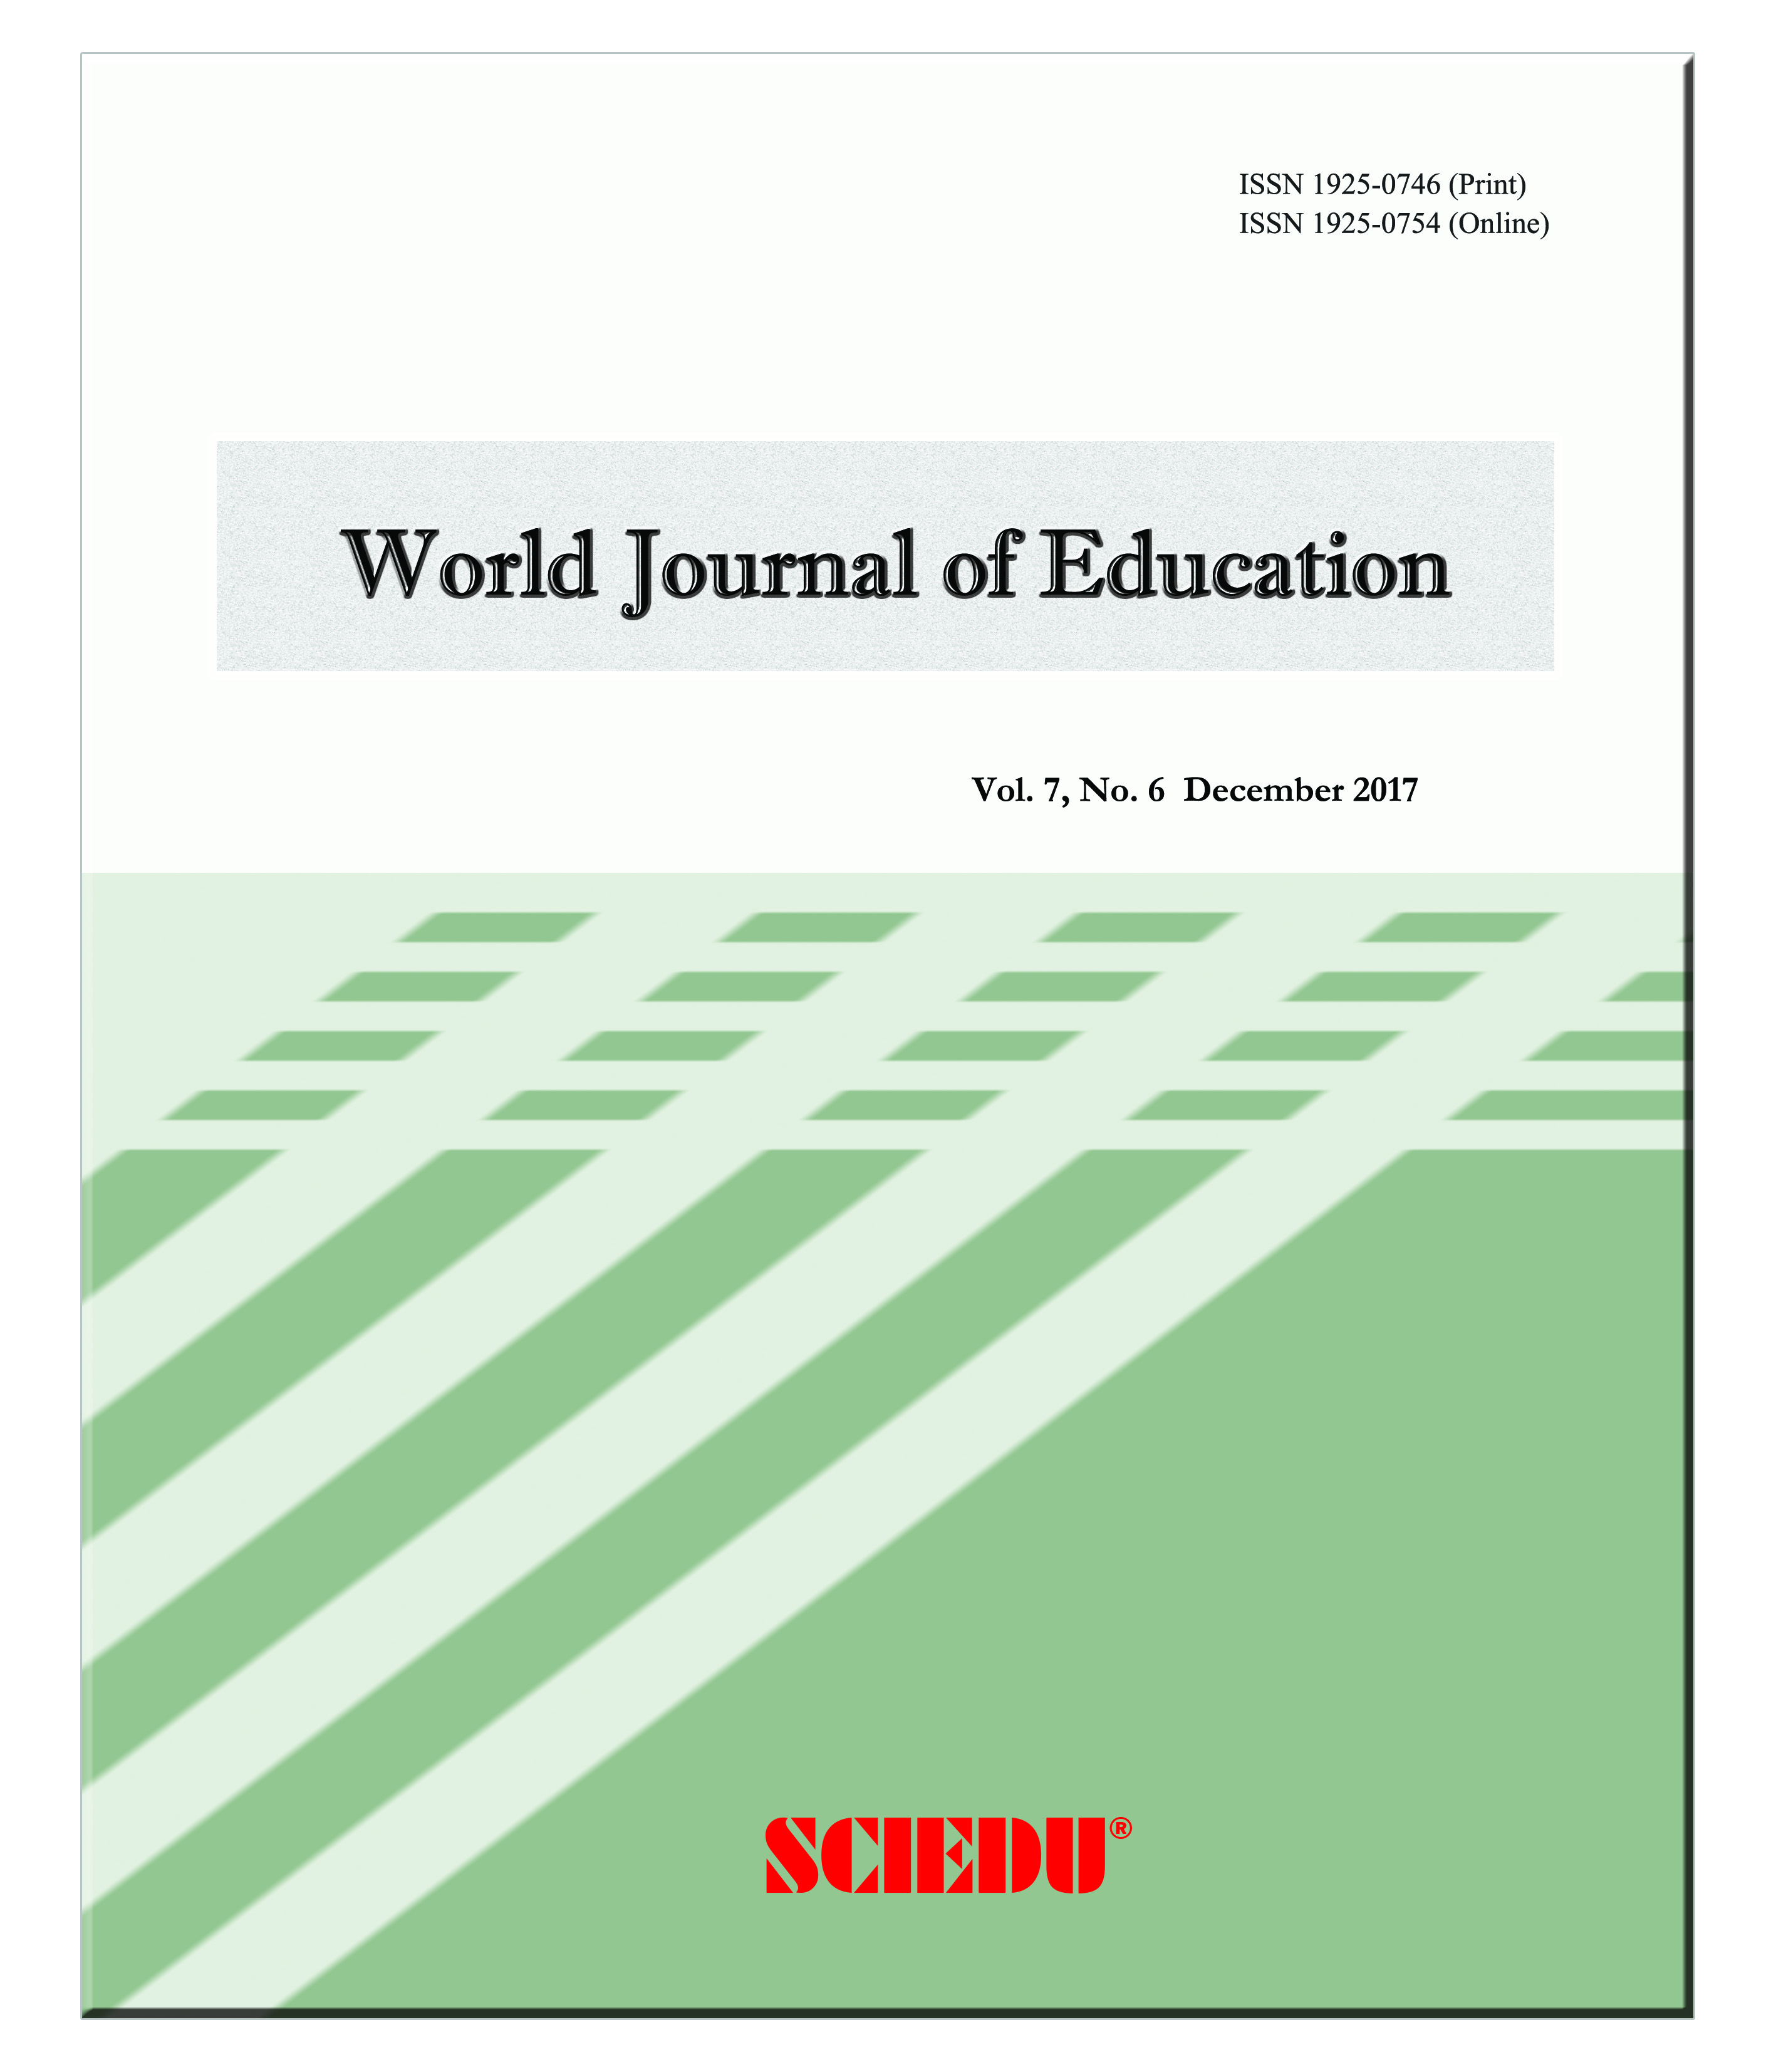 journal article on education